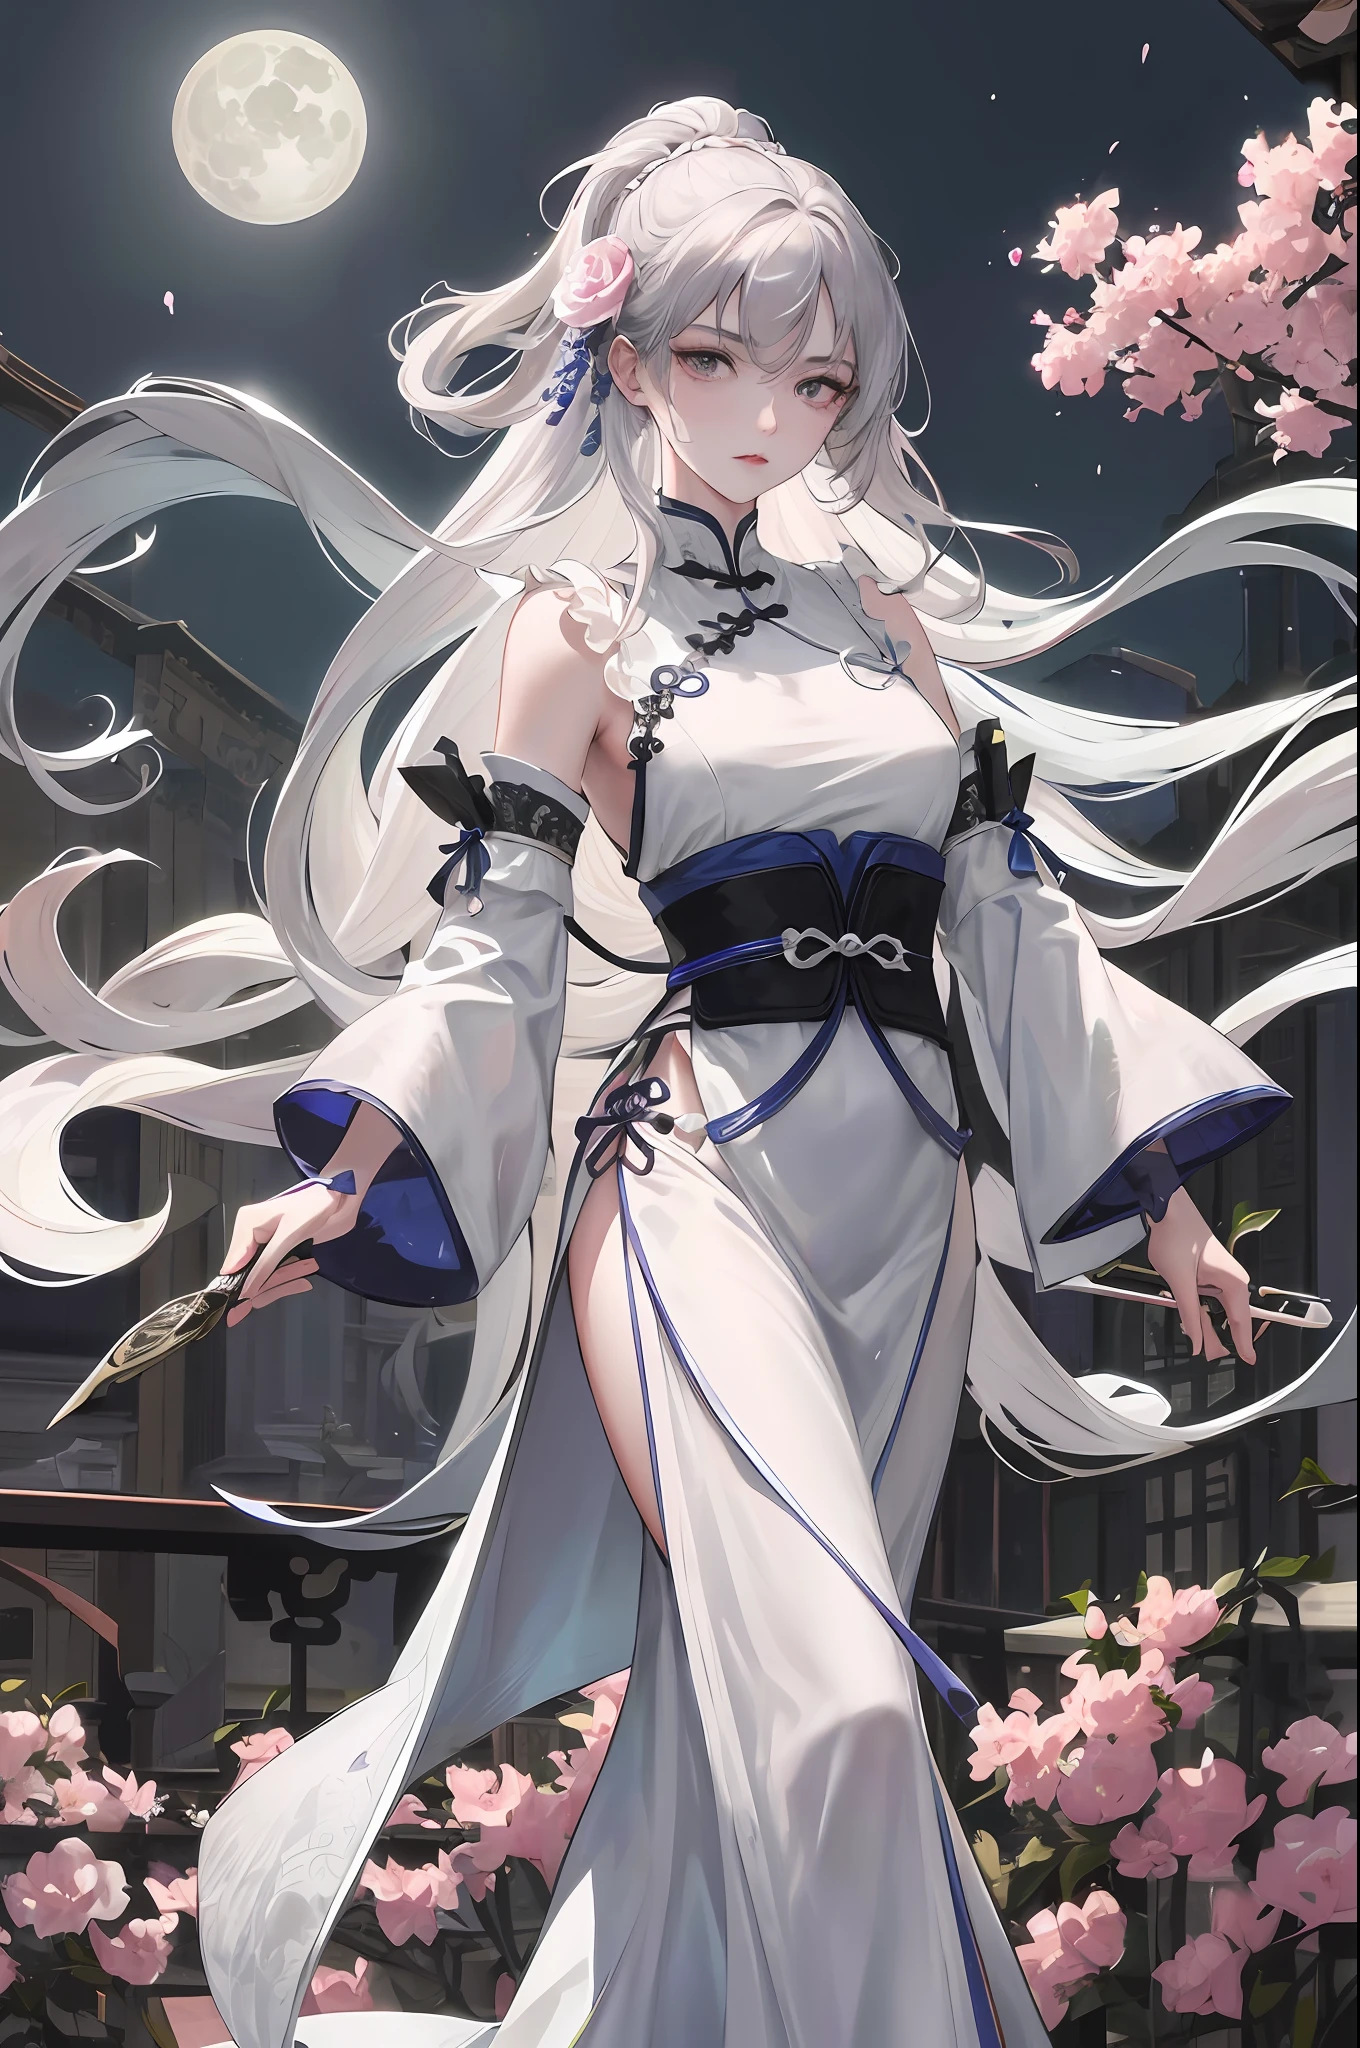 Masterpiece, Excellent, Night, Full Moon, 1 Woman, Mature Woman, Chinese Style, Antique China, Sister, Royal Sister, Cold Face, Expressionless, Silver-White Long-Haired Woman, Light Pink Lips, Calm, Intellectual, Three Bands, Gray Eyes, Assassin, Short Knife, Flower Ball Background, Walking in the Street View, Facial Details